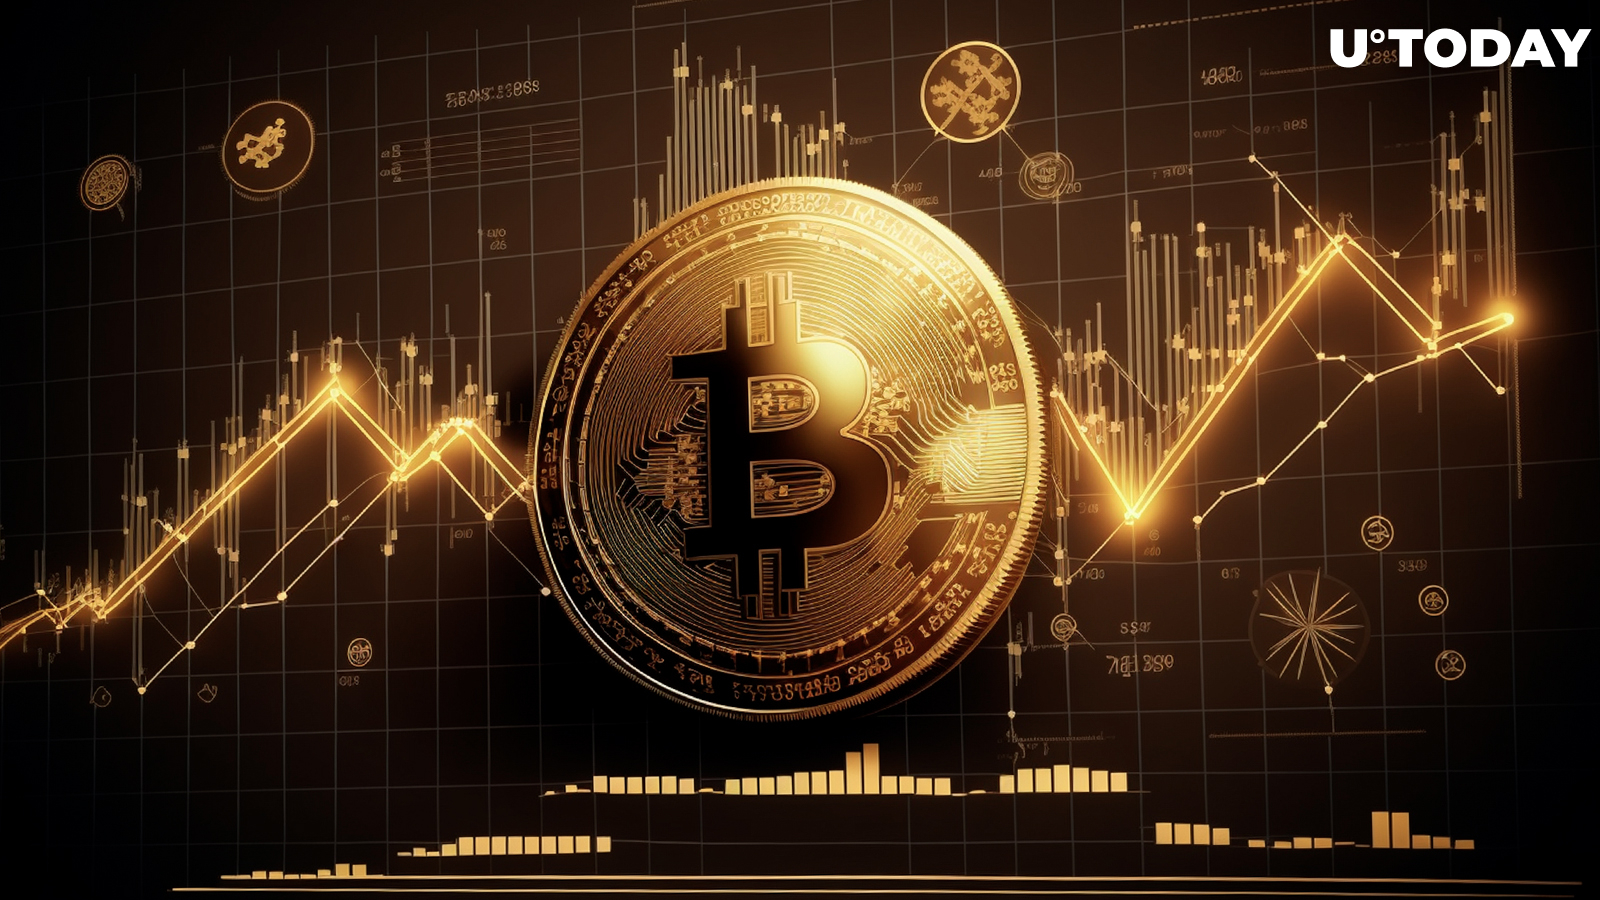 Bitcoin (BTC) Dominance Rebounds to Year's High: What Does It Mean?